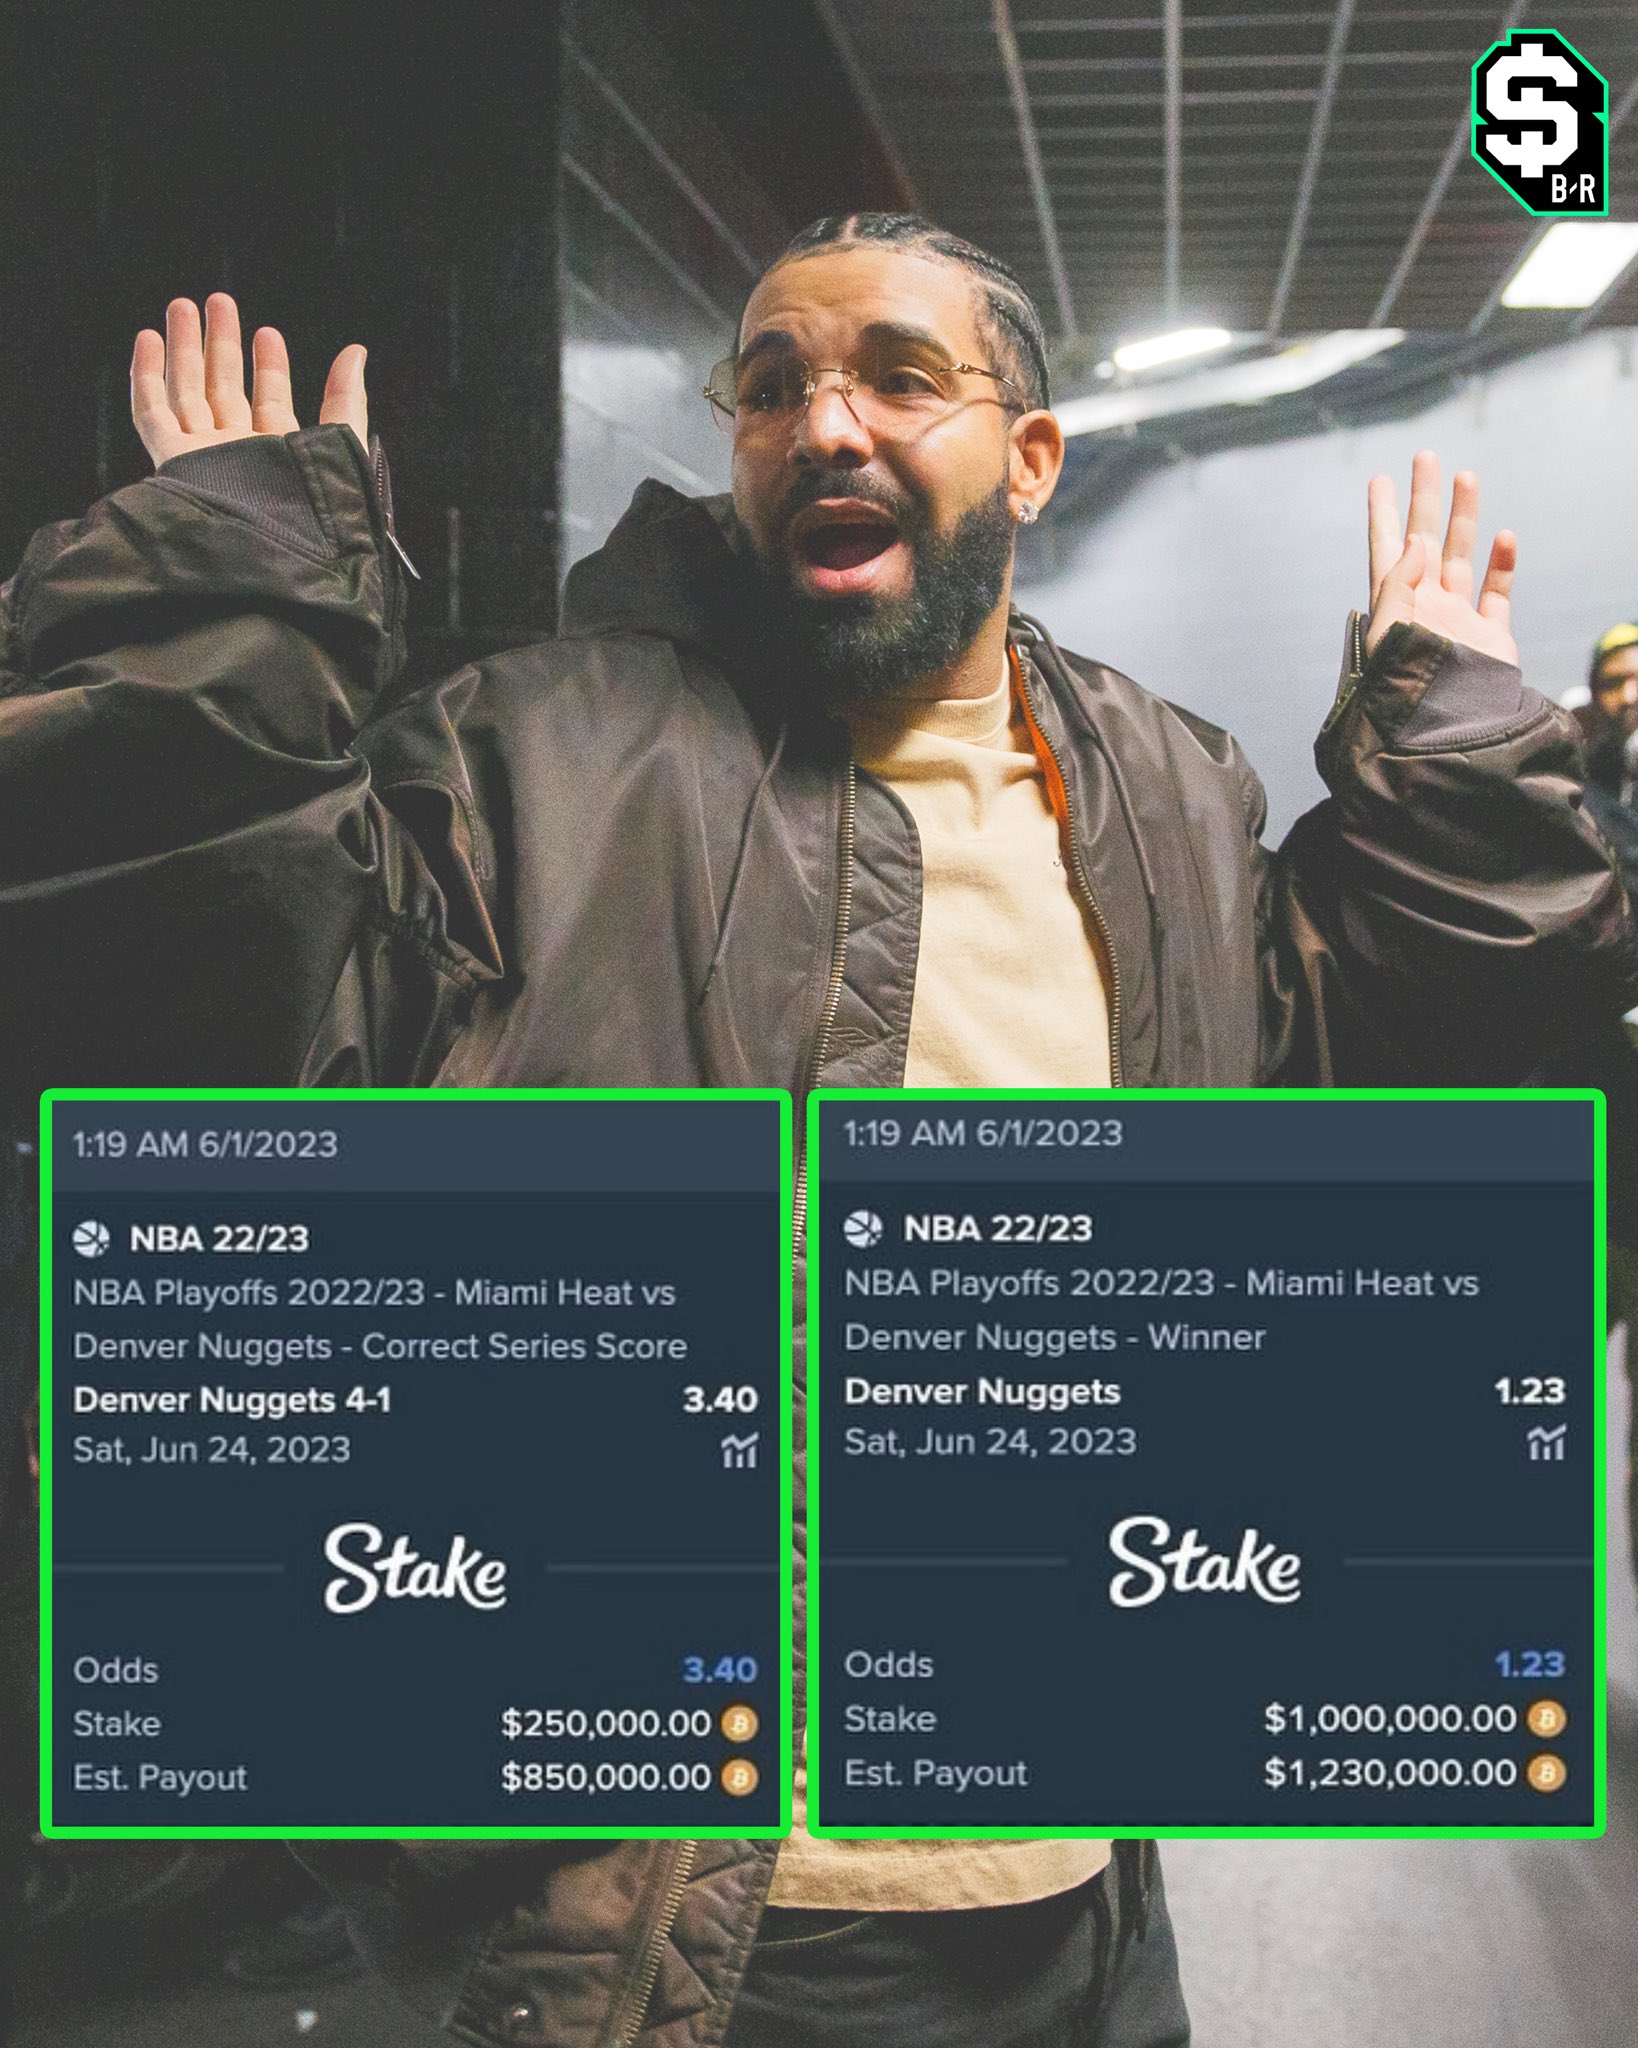 br_betting on Twitter "DRAKE DROPS MASSIVE BETS ON THE NUGGETS 😳 https